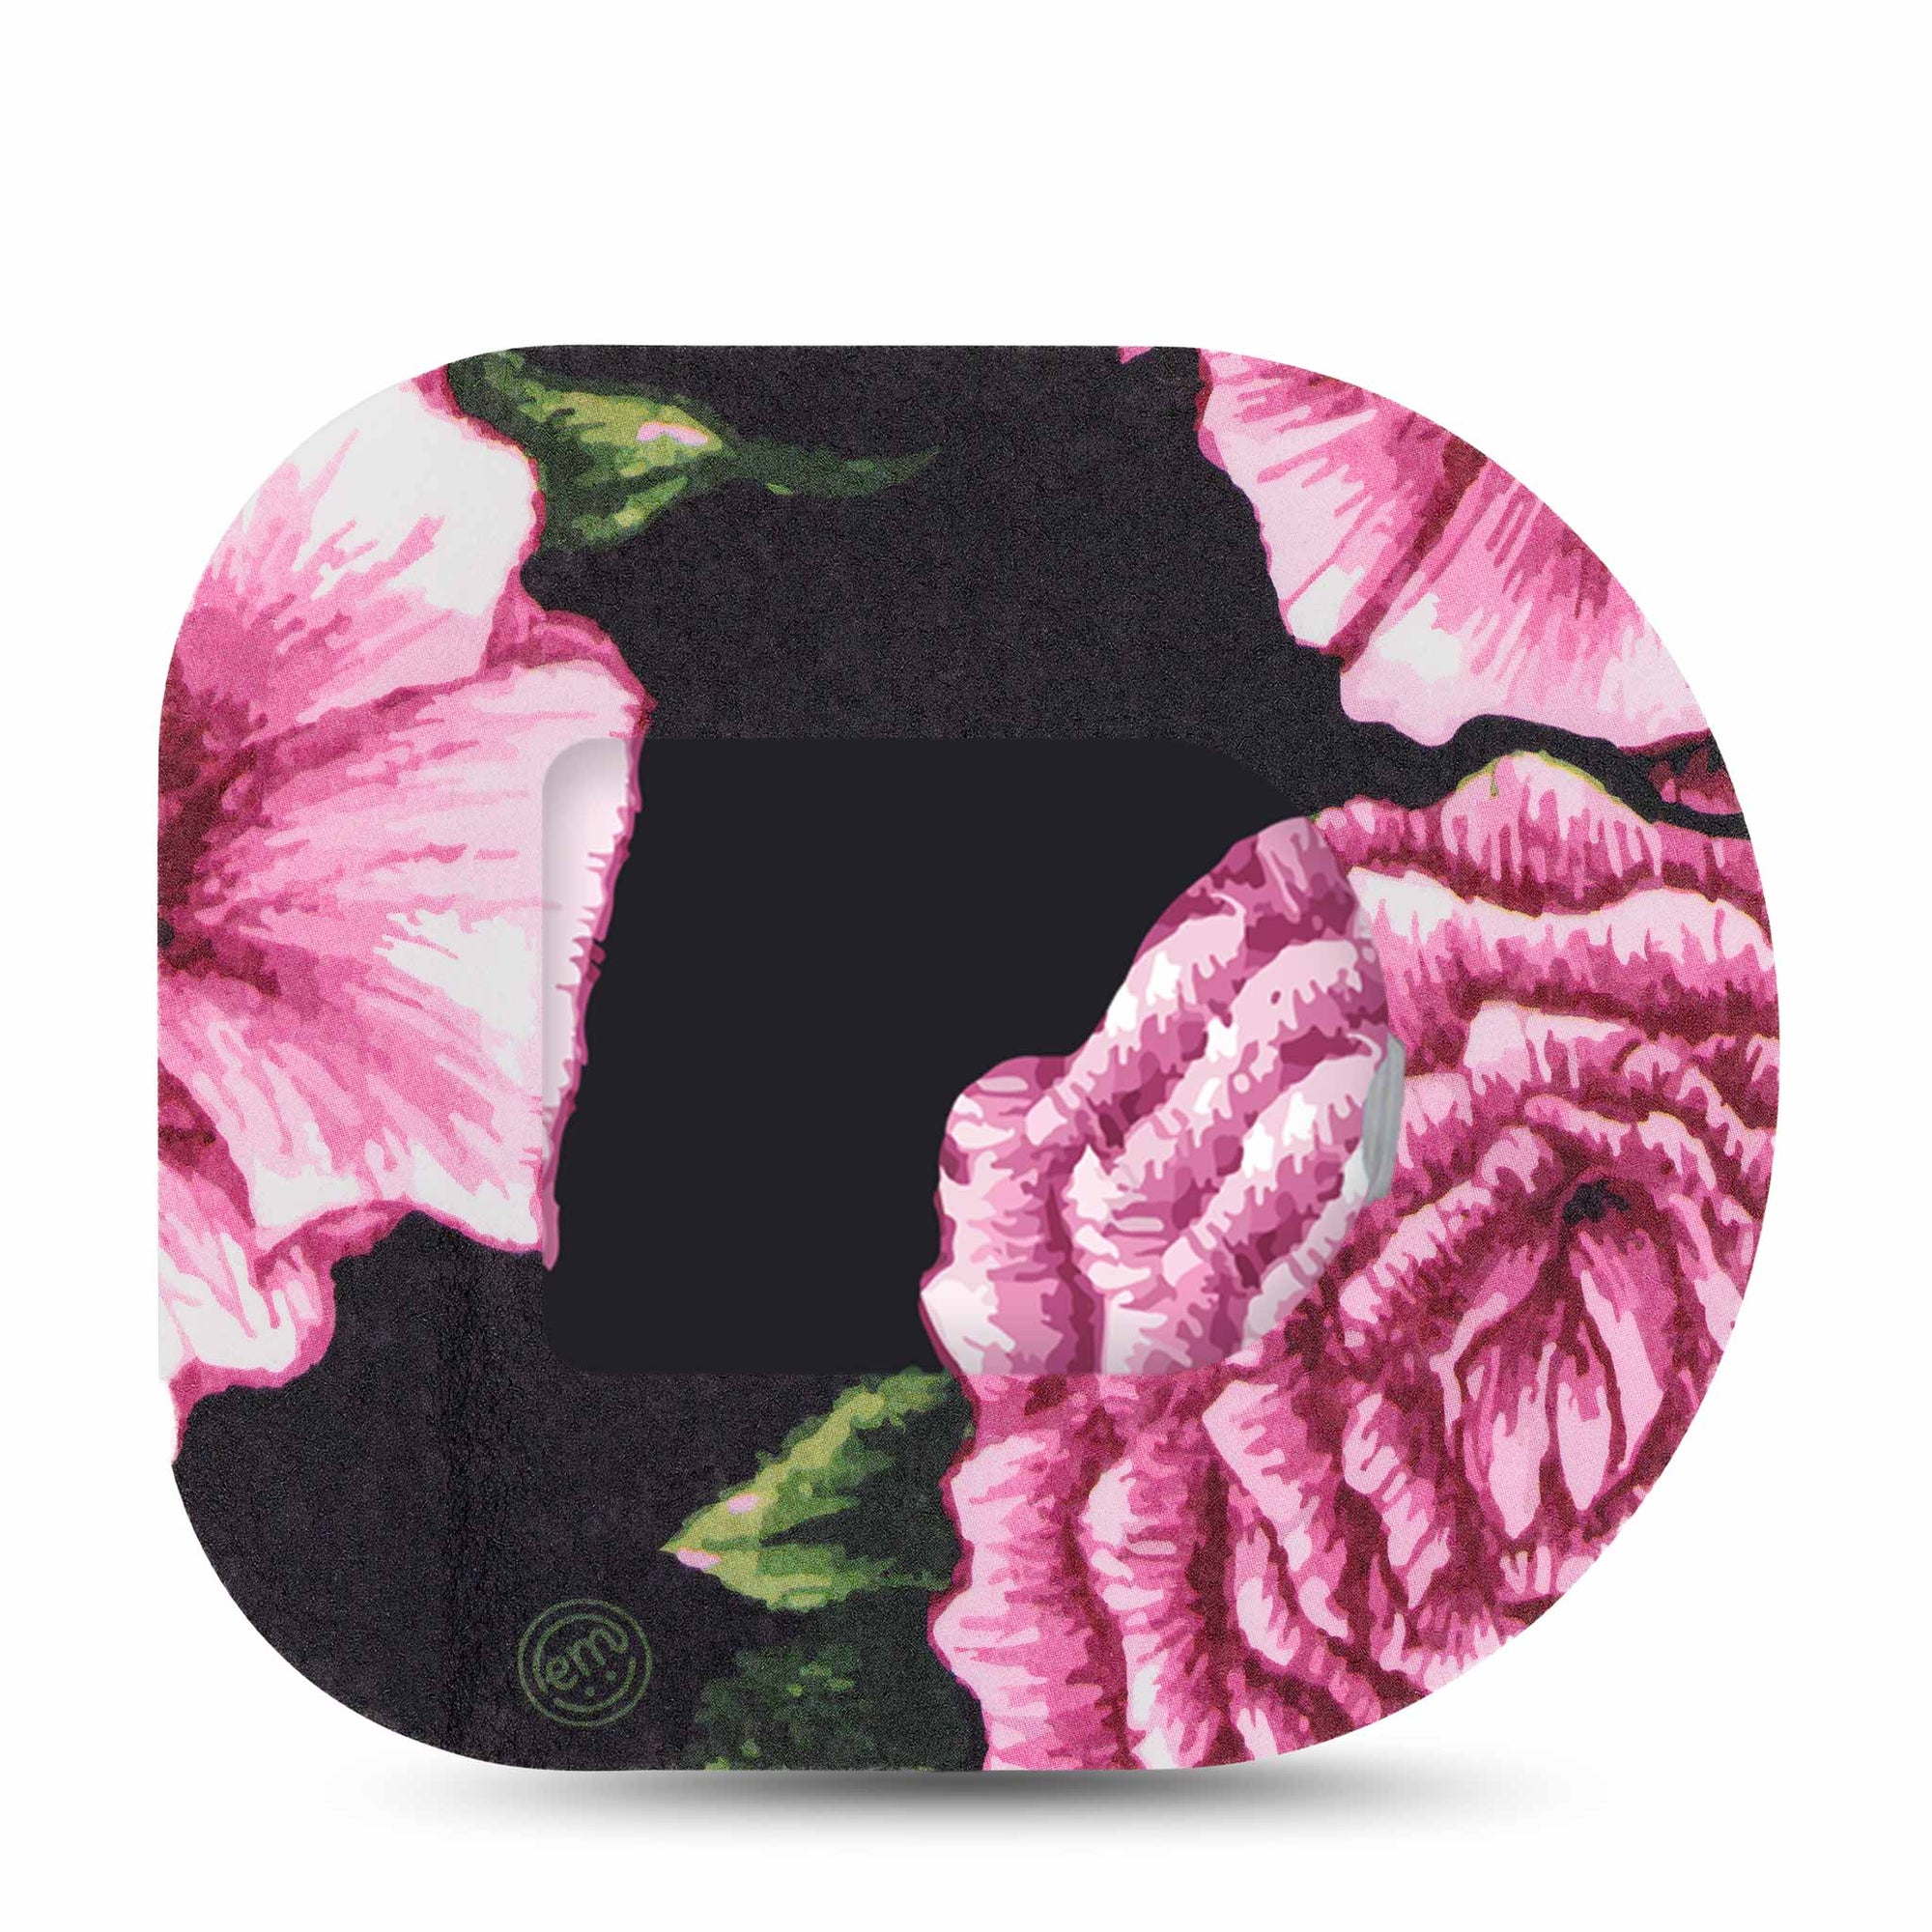 ExpressionMed Intricate Flower Pod Transmitter Sticker with Tape